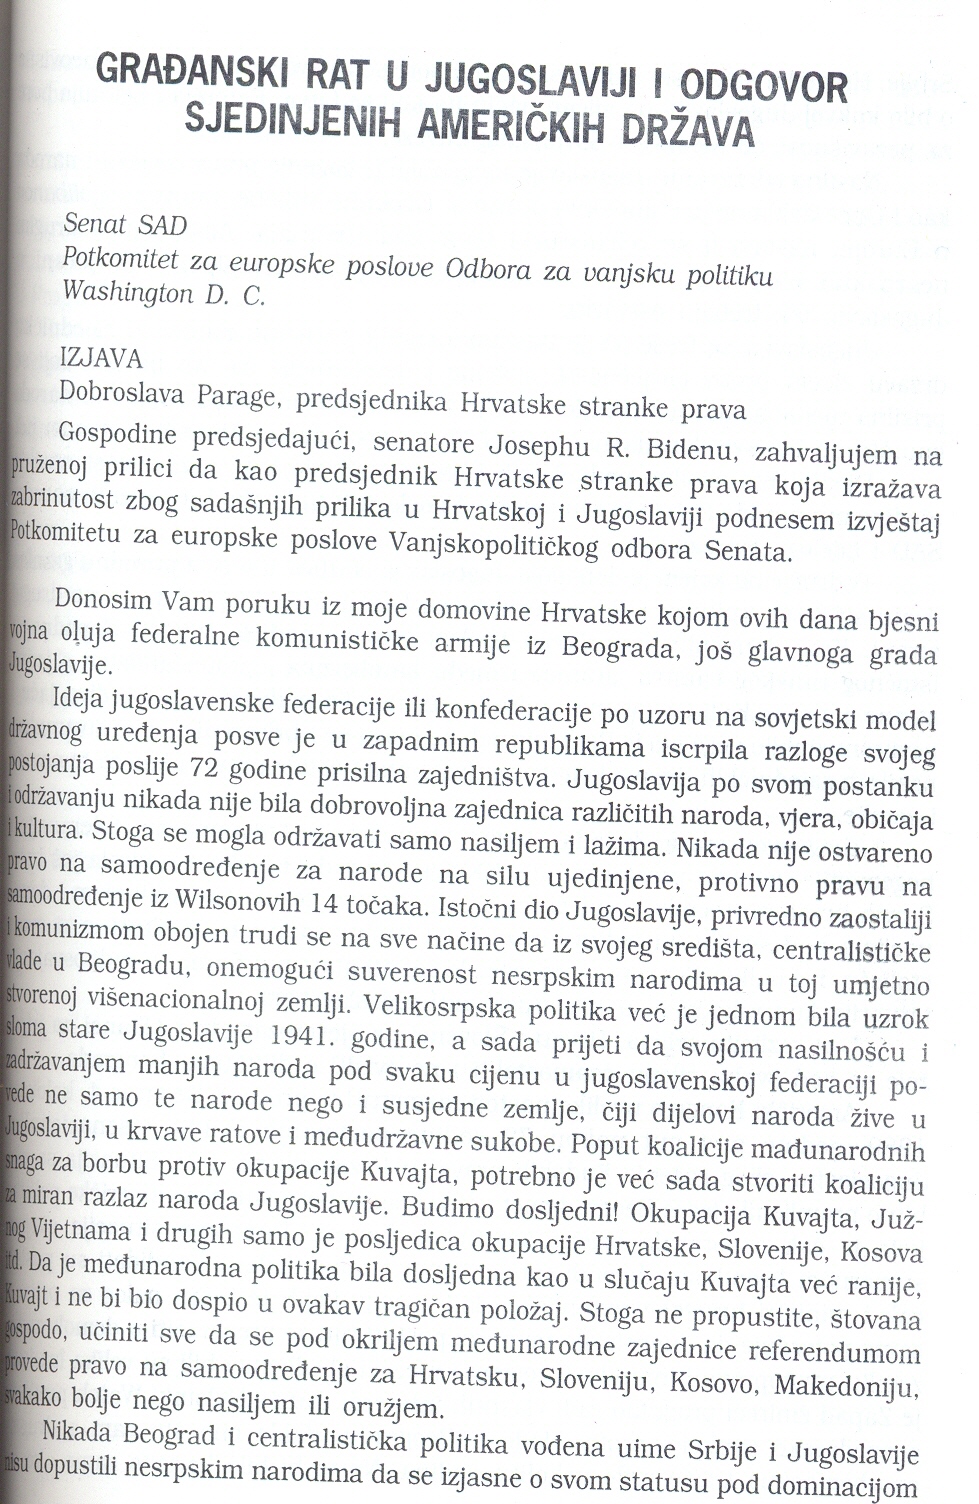 SPEECH OF DOBROSLAV PARAGA IN THE COMMITTEE FOR FOREIGN AFFAIRS OF AMERICAN SENATES  PRESIDED BY  SENATORS PELL, BIDEN, SIMON, ROBB AND PRESSLER ABOUT CIVIL WAR IN YUGOSLAVIA,  FEBRUARY 21, 1991 YEAR.